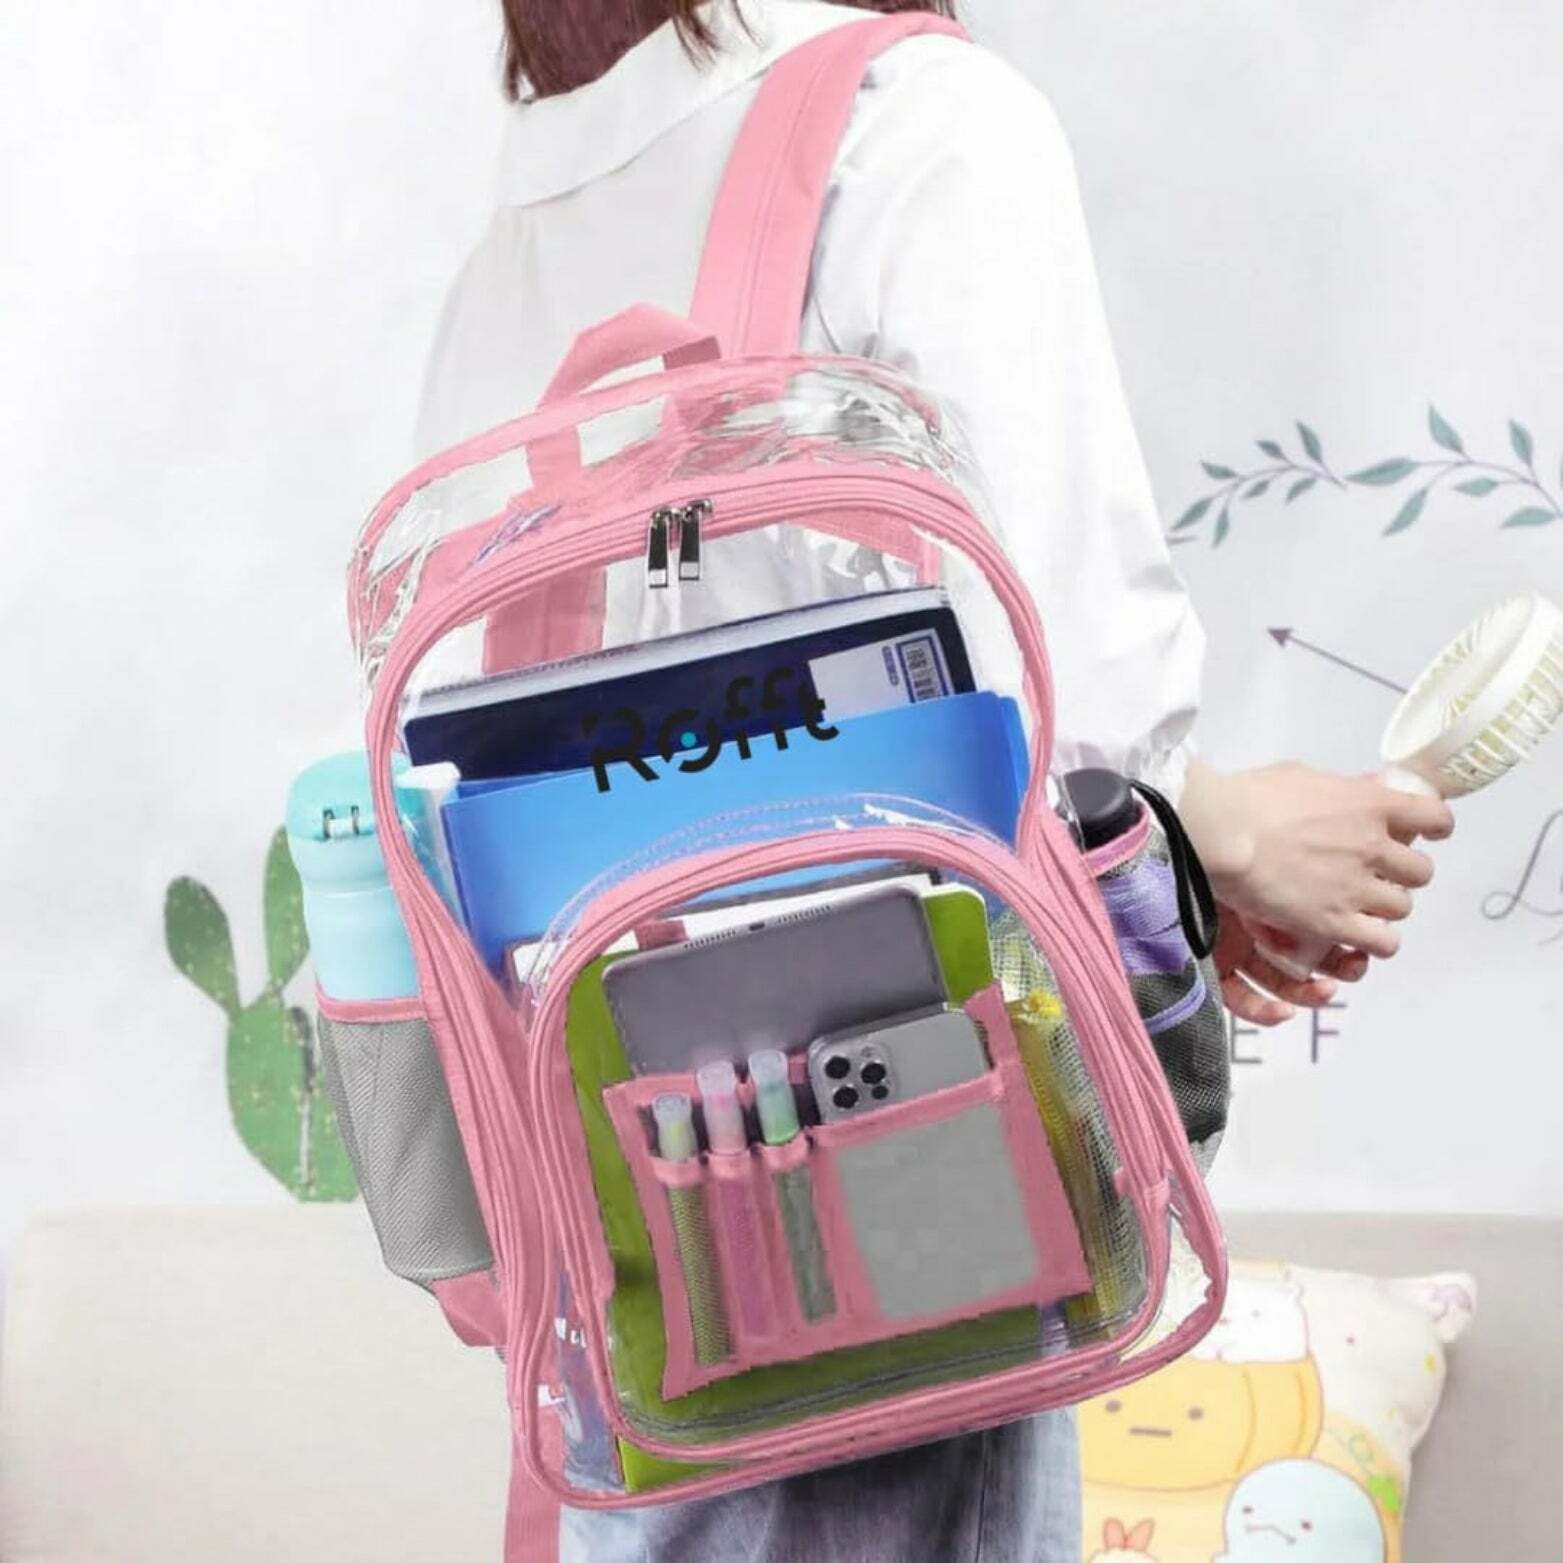 ROFFT Medium Clear Backpack - Durable PVC with Reinforced Straps and Multiple Pockets, Pink